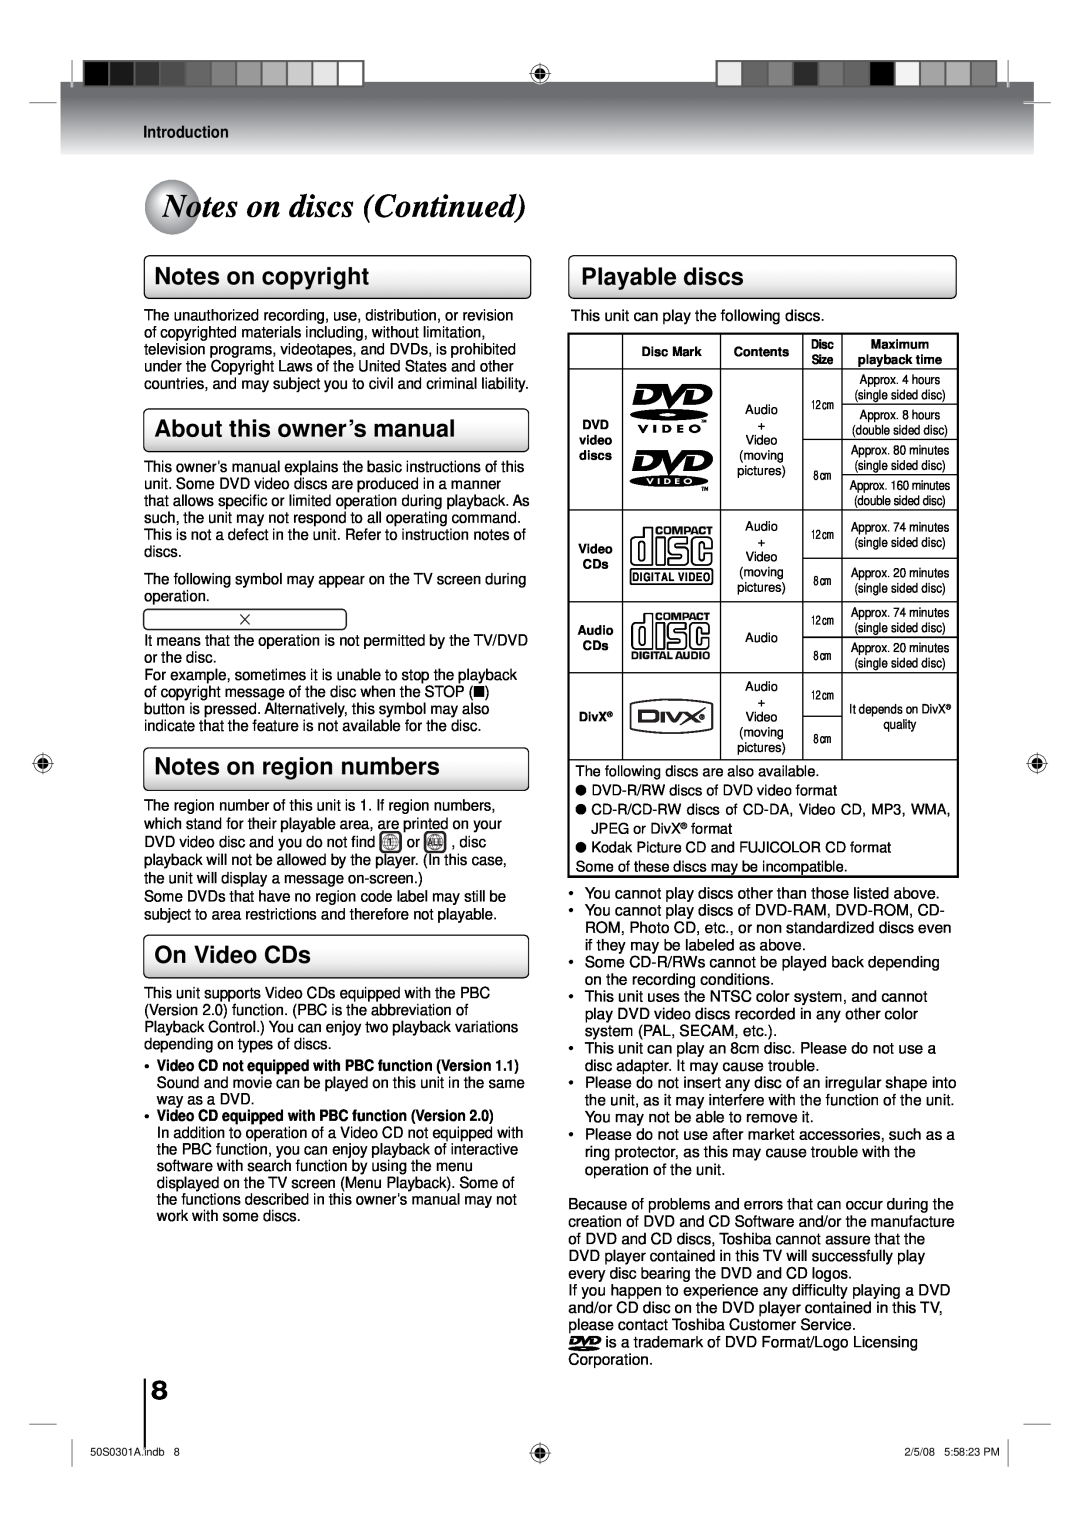 Toshiba 22LV505C Notes on discs Continued, Notes on copyright, About this ownerʼs manual, Notes on region numbers 